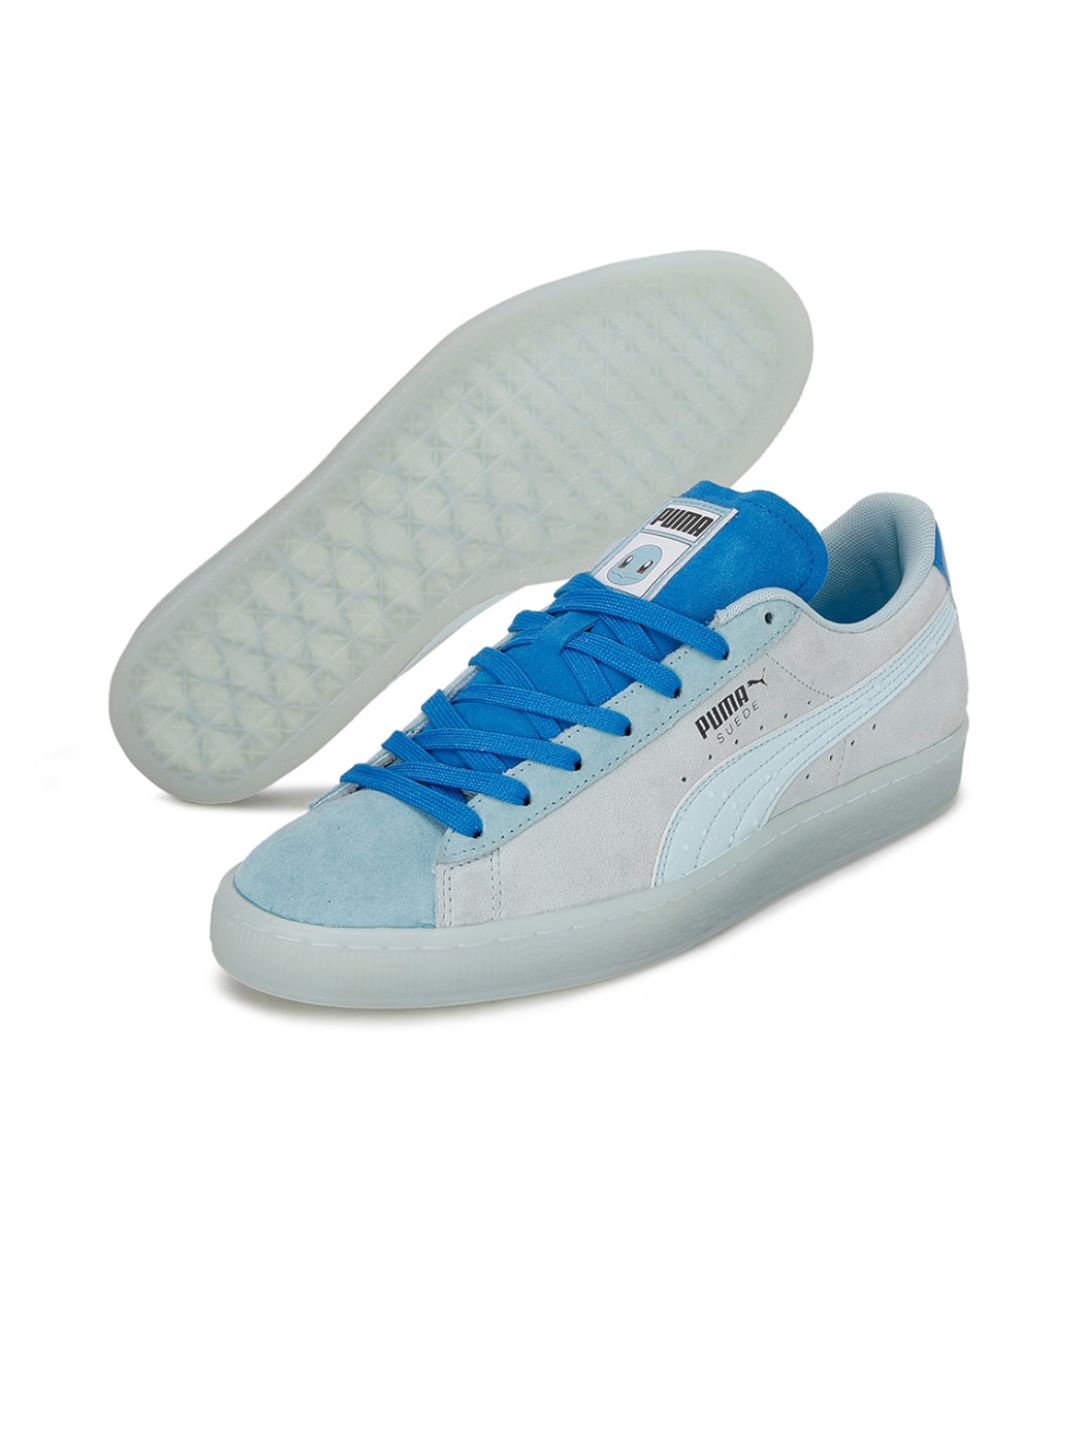 Puma Unisex Blue Woven Design Leather Sneakers Price in India